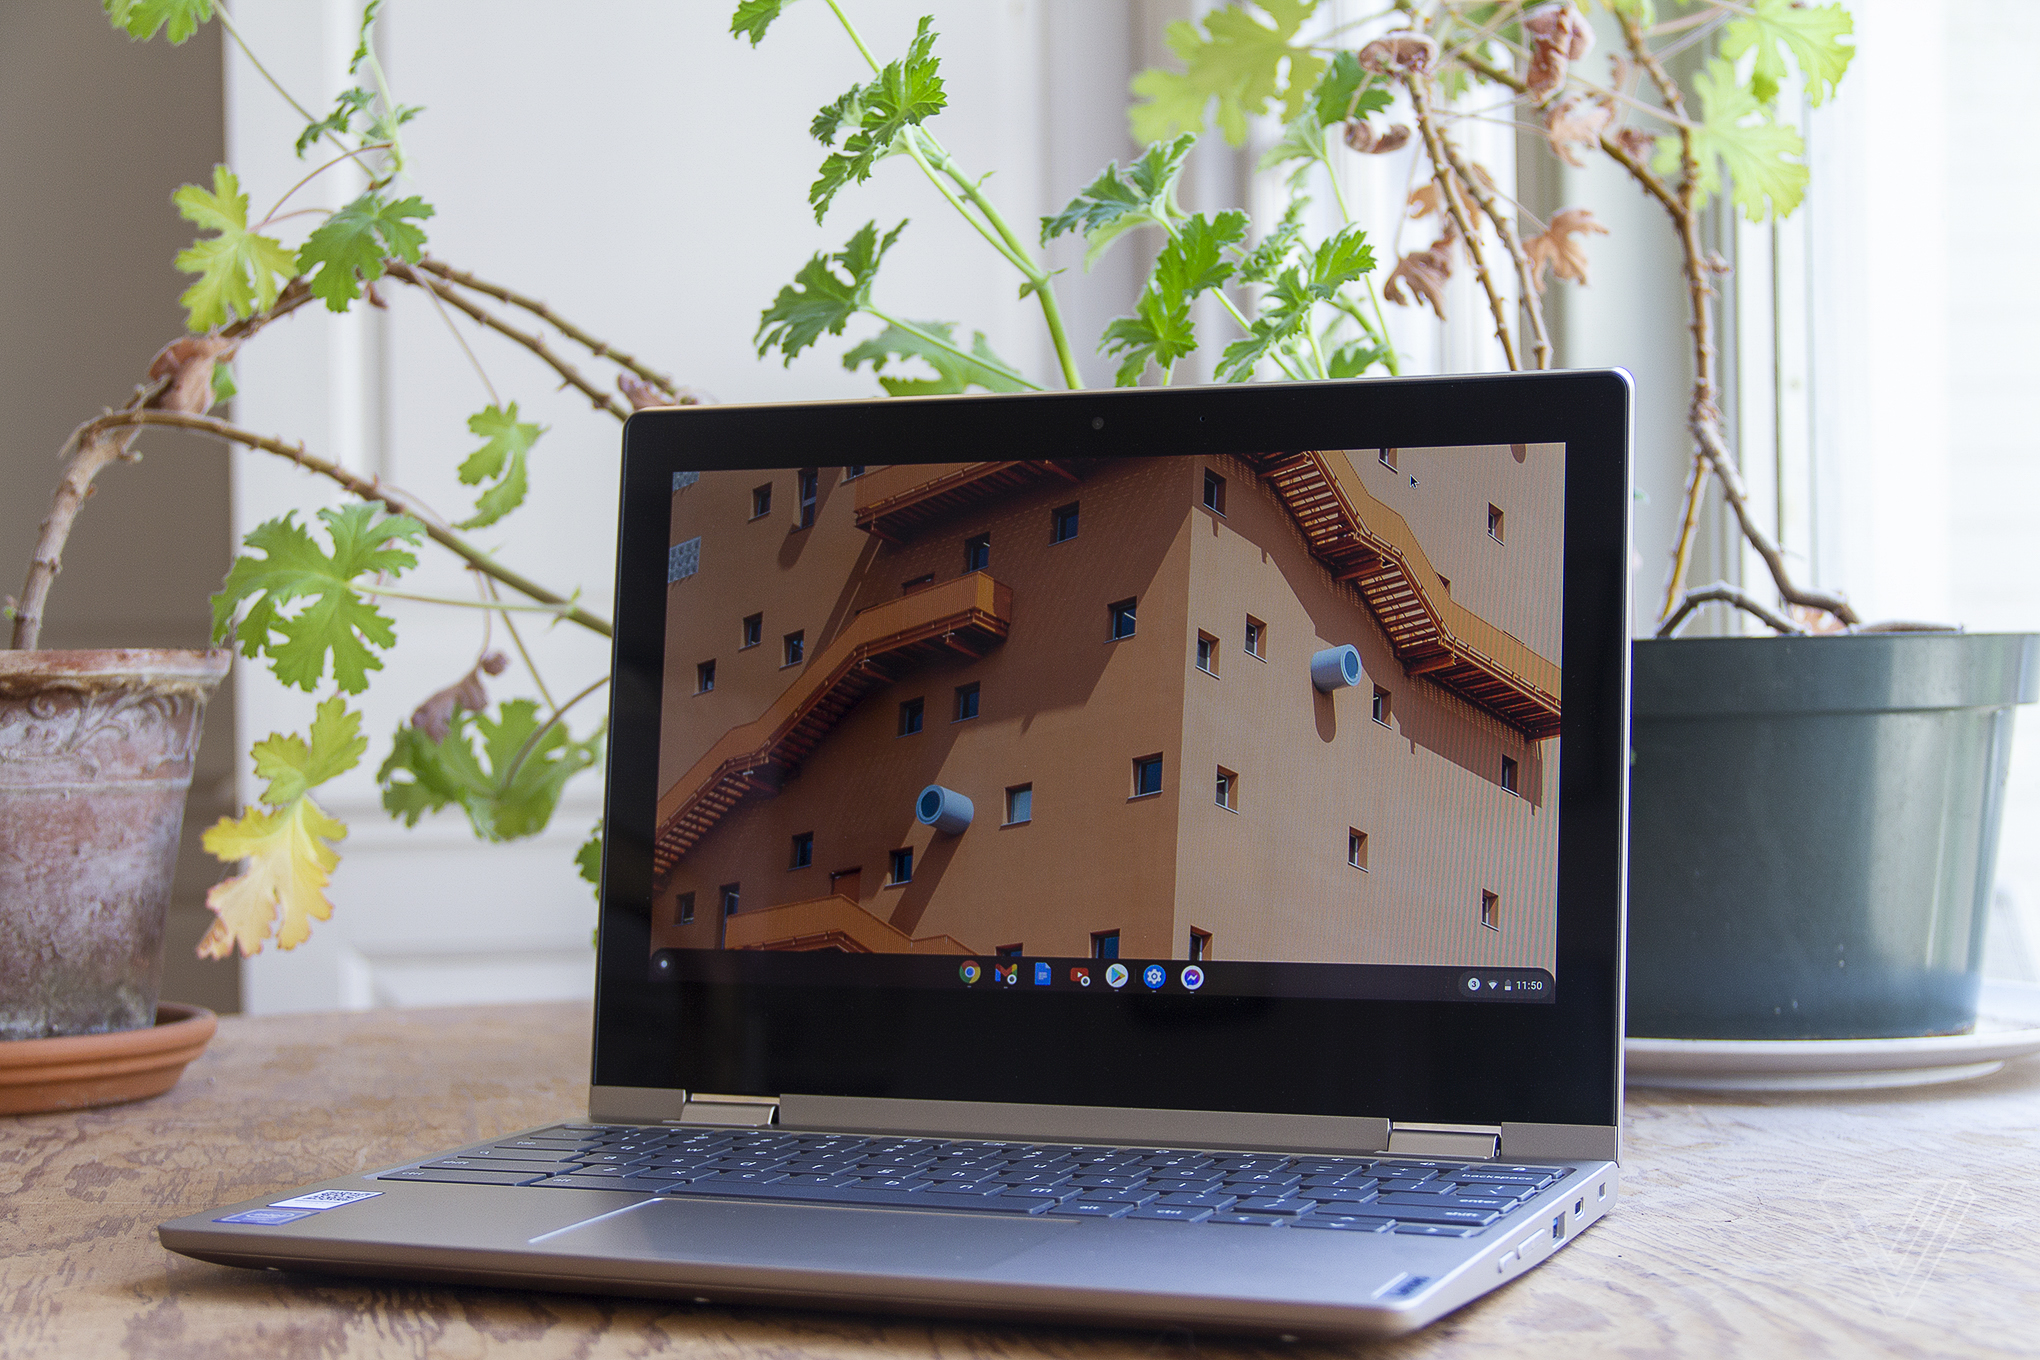 The Lenovo Ideapad Flex 3 Chromebook sits open on a table in front of a window and two houseplants. The screen displays the upper windows of a large building.